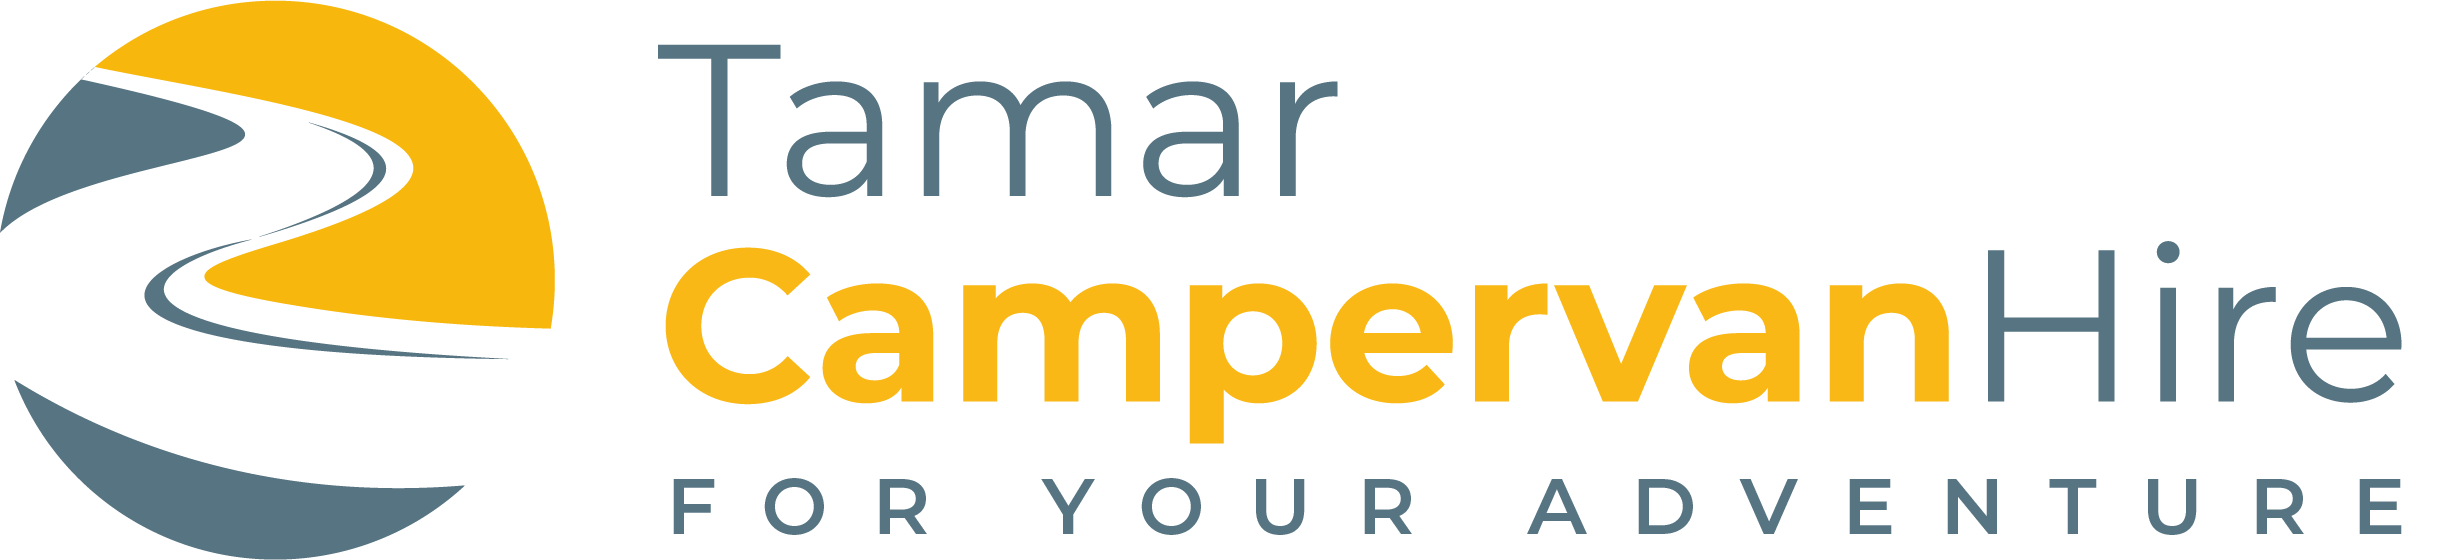 Logo of Tamar Campervan Hire Plymouth Rental - Trailers And Motorhomes In Plymouth, Devon